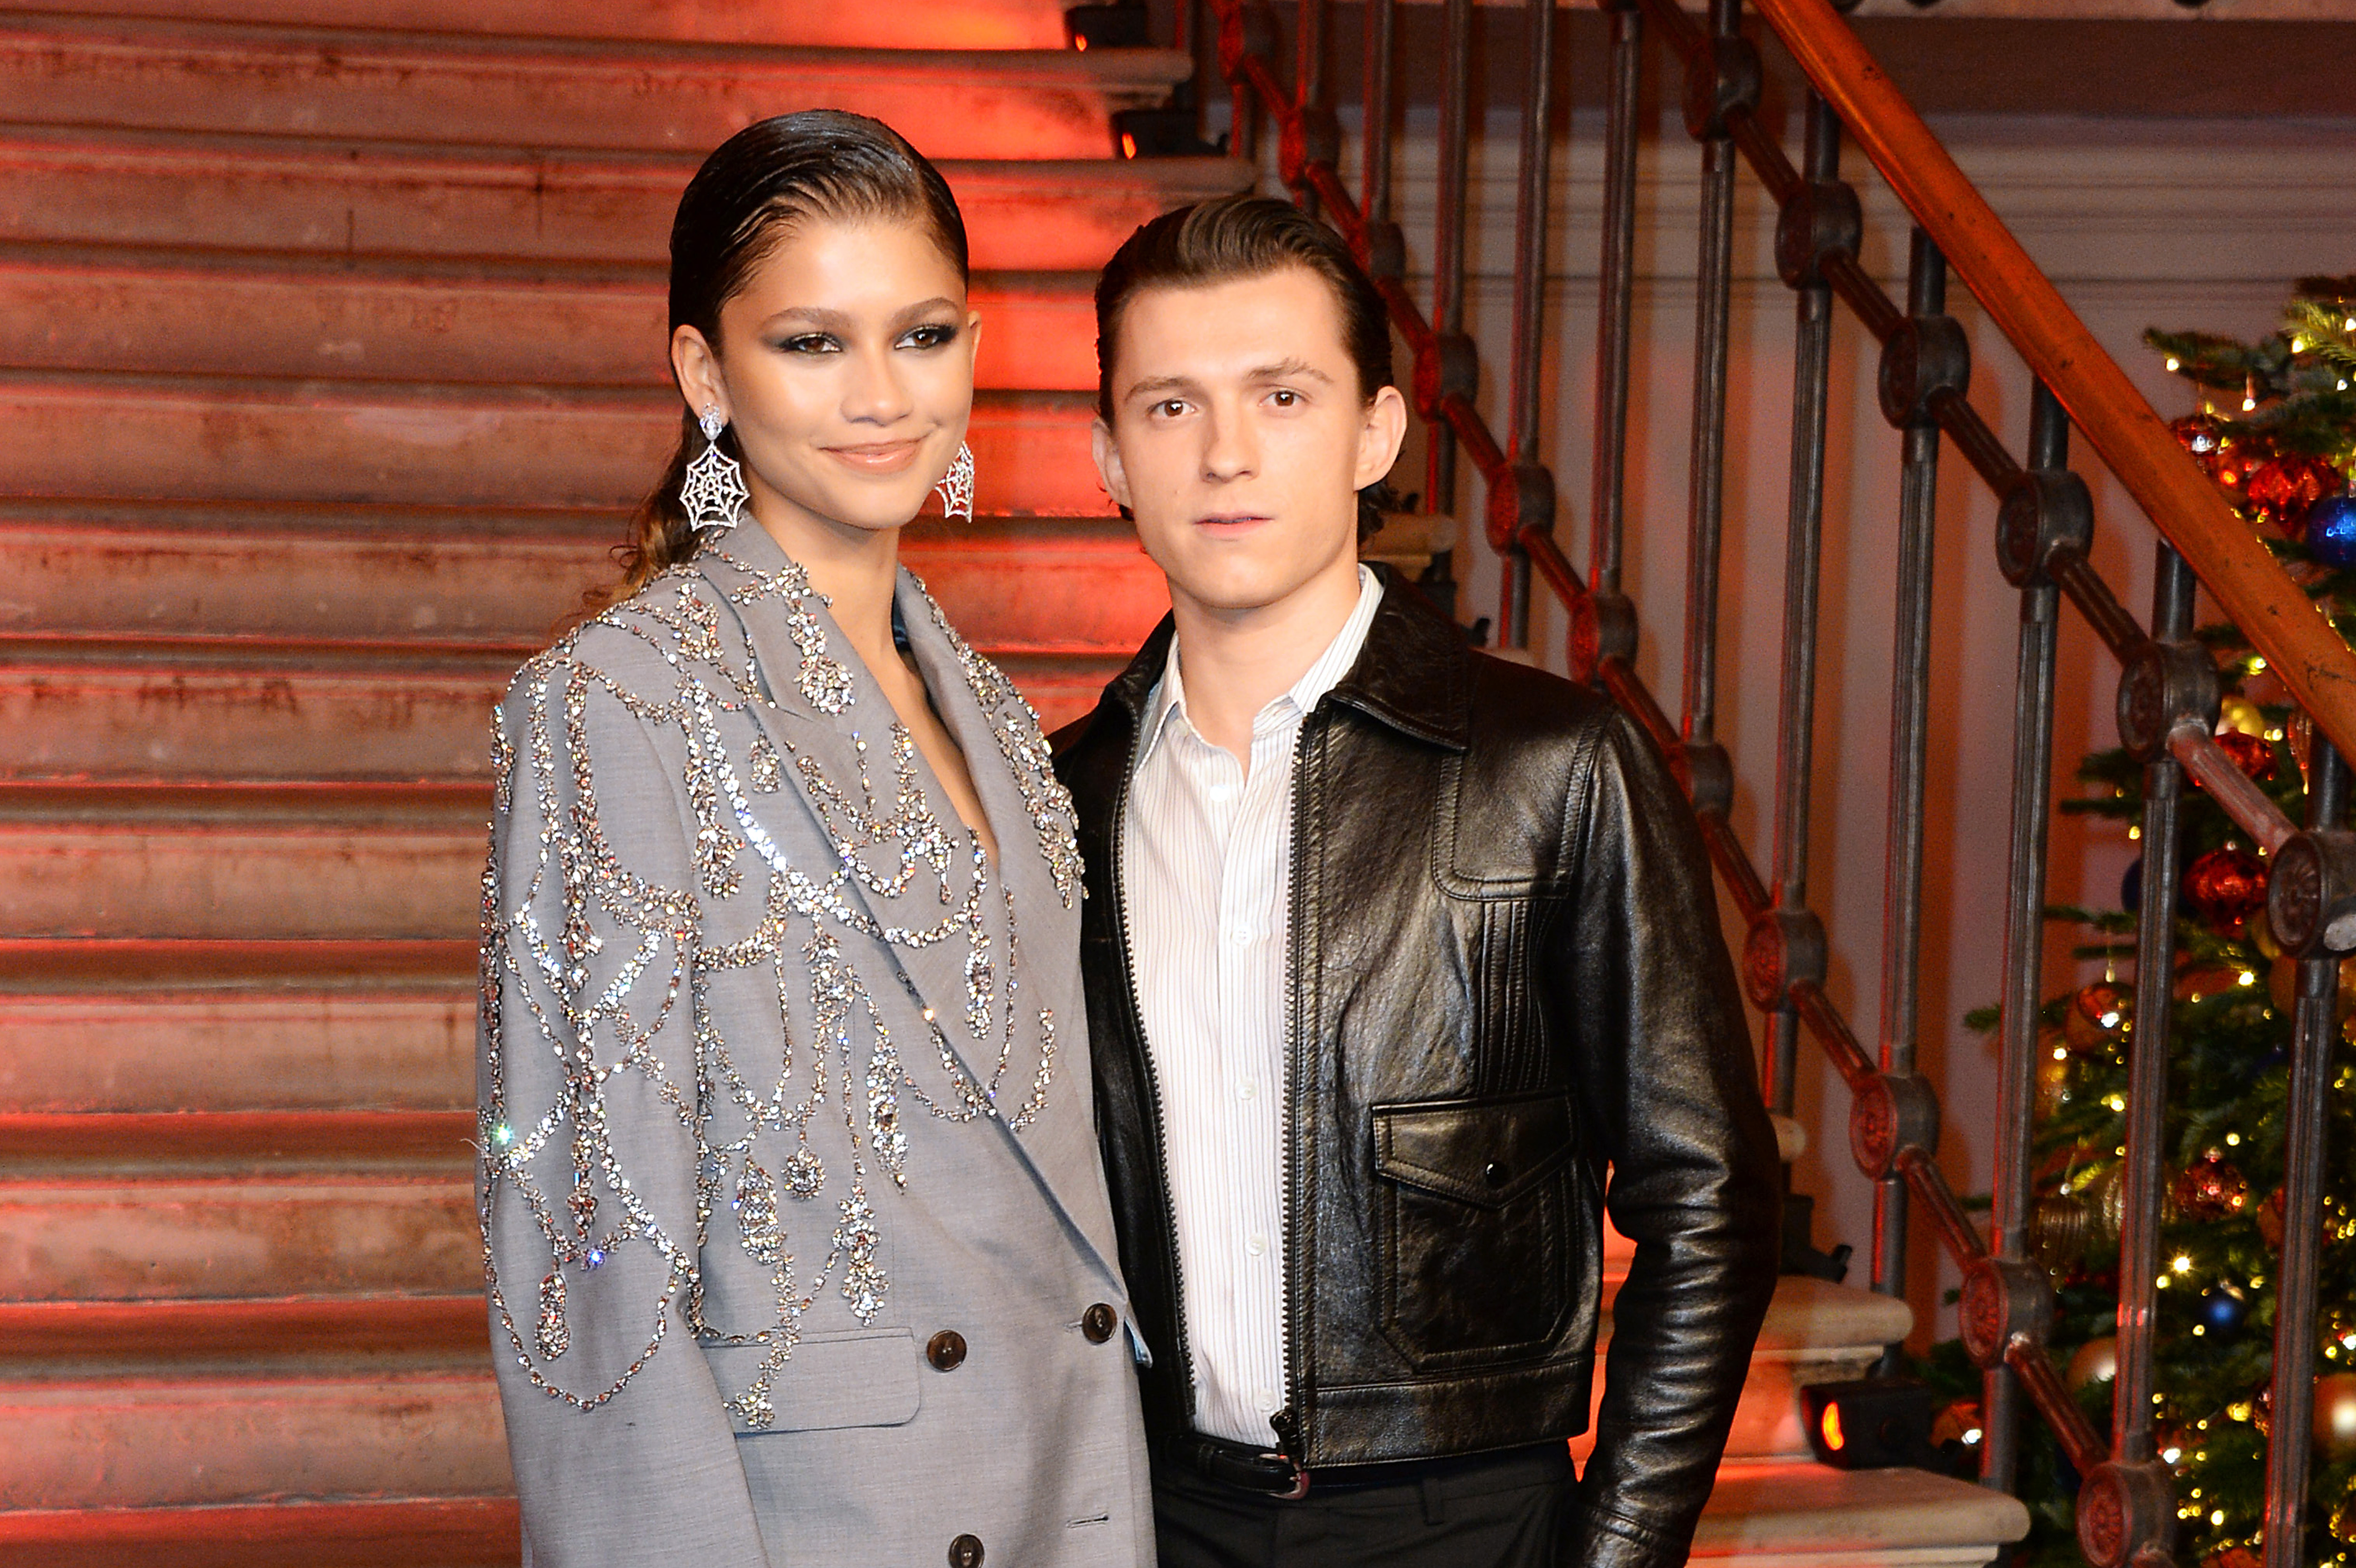 The actor is also known for his high profile relationship with US actress and singer Zendaya